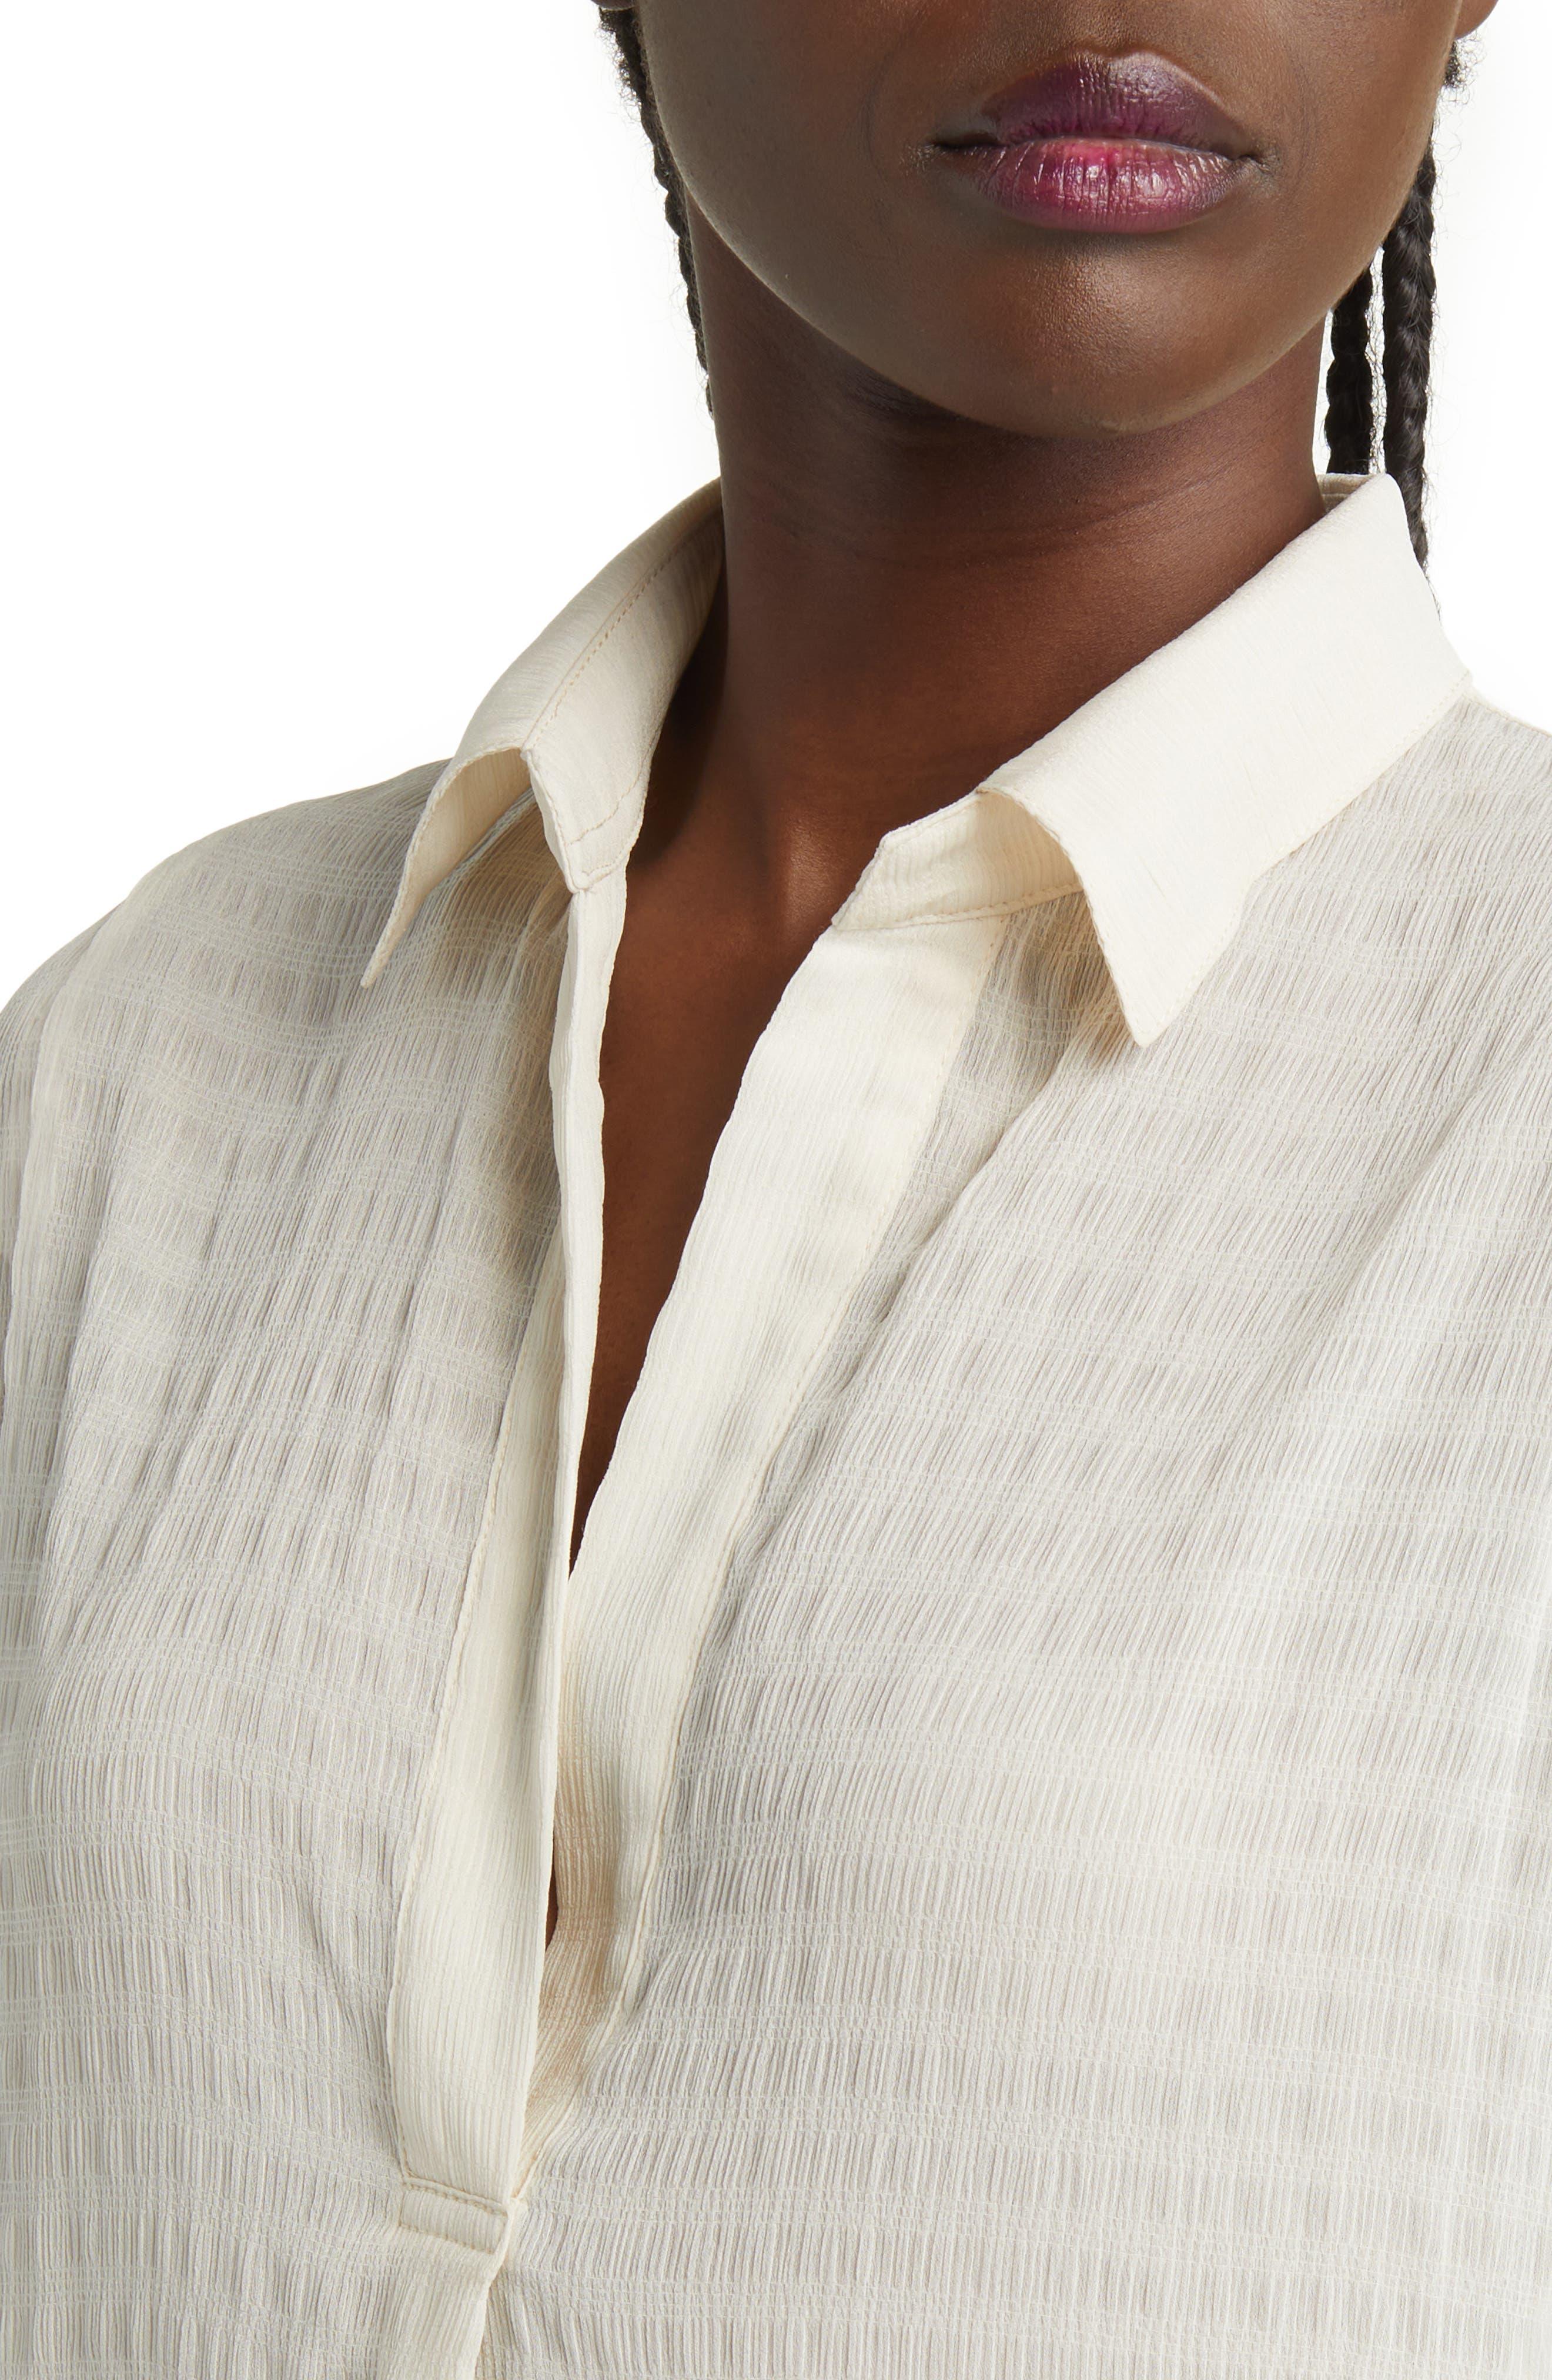 French Connection Clar Rhodes Textured Popover Tunic Shirt in White | Lyst